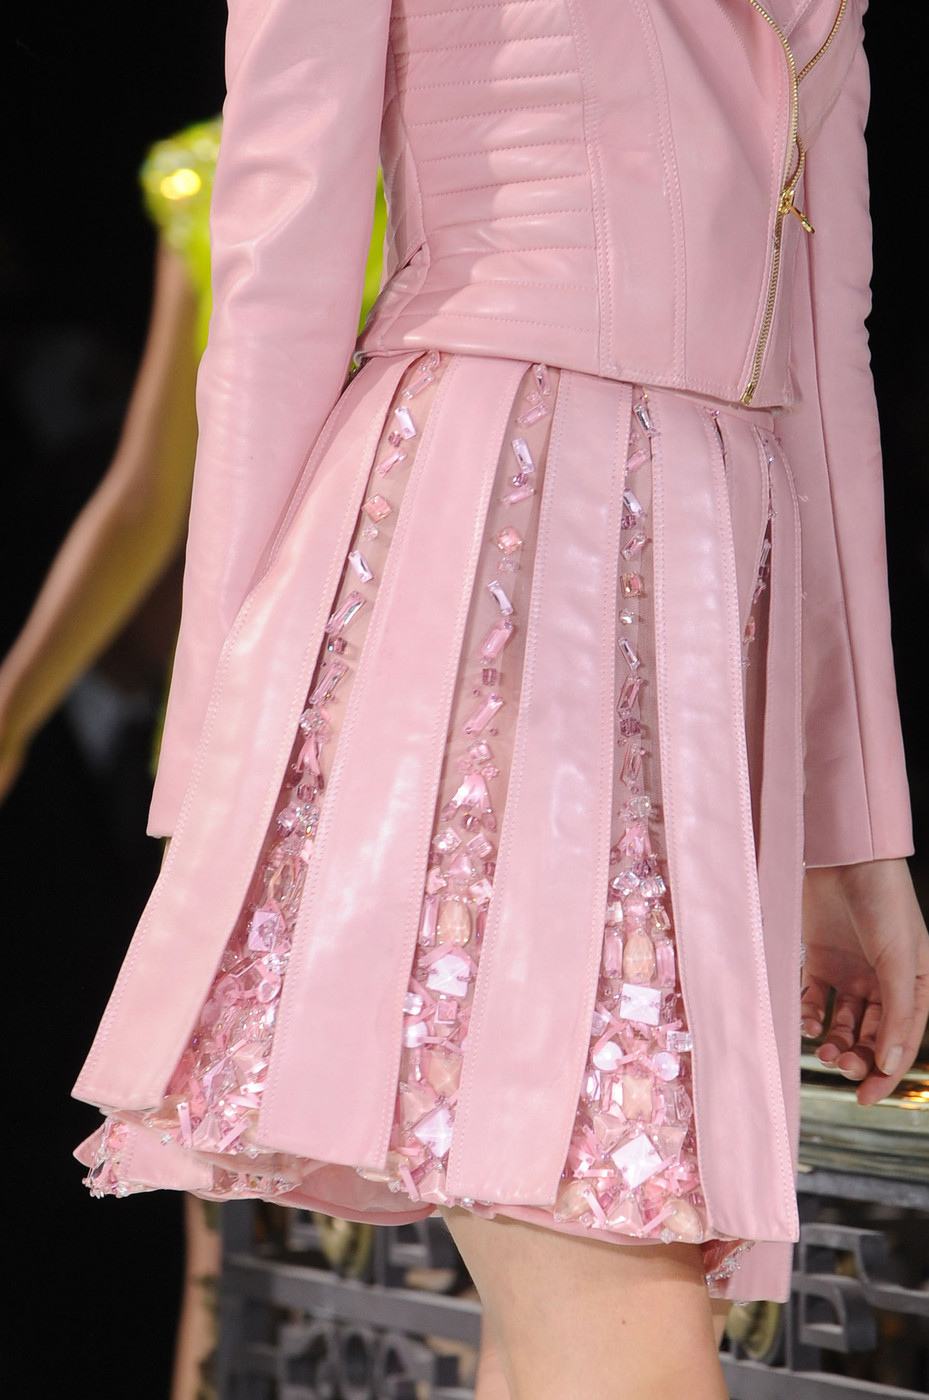 Versace - Haute Couture S/S 2013 | Fashion, Pink outfits, Beautiful outfits